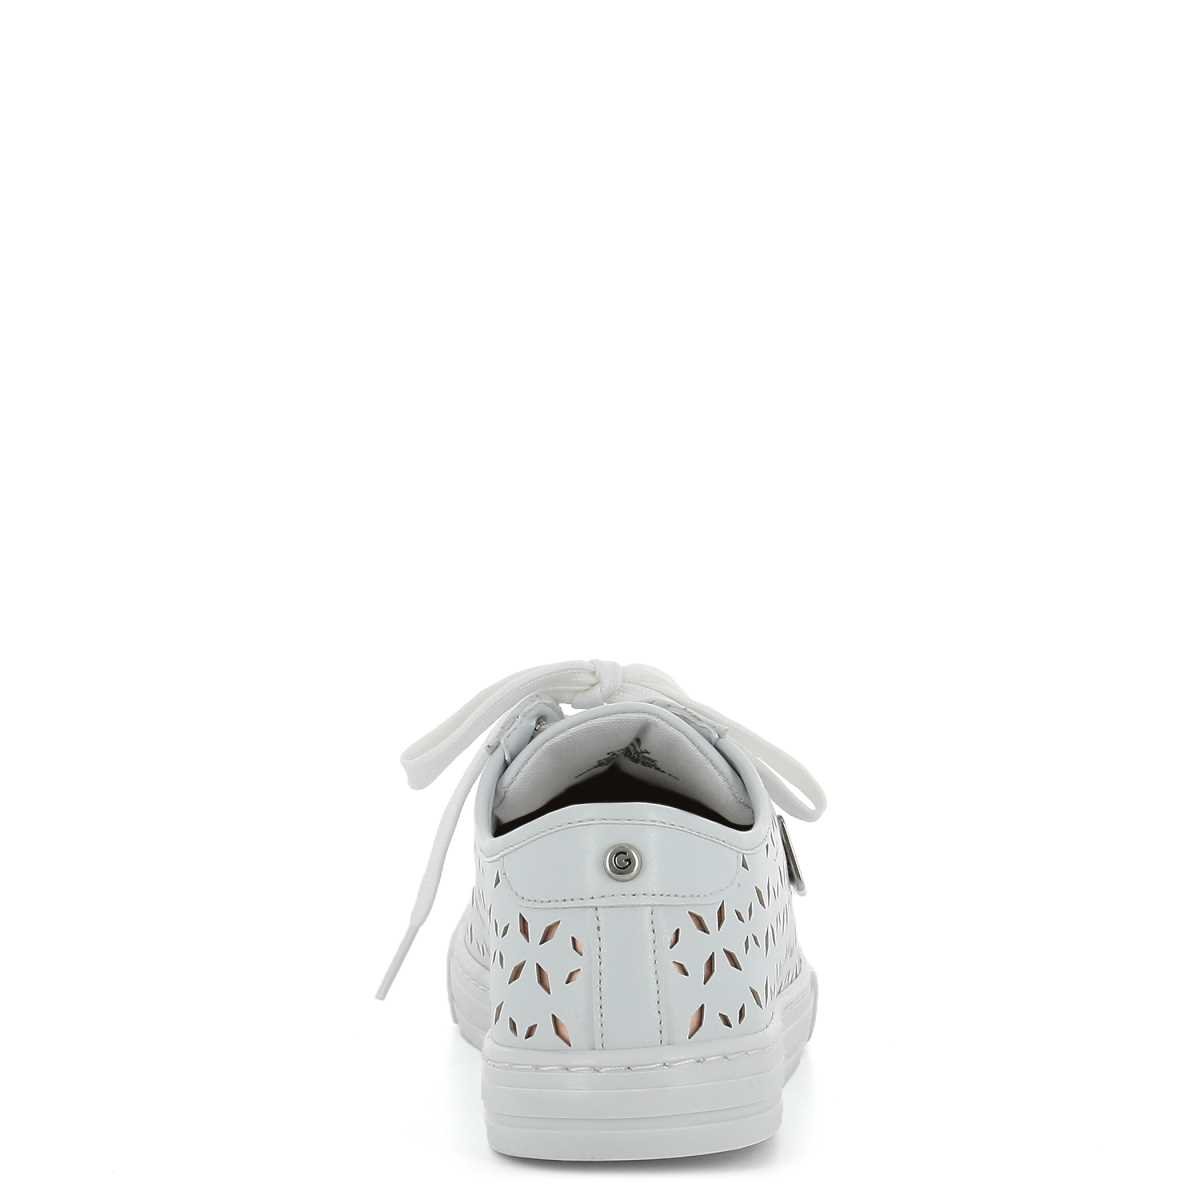 Tenis Spring Laser G By Guess